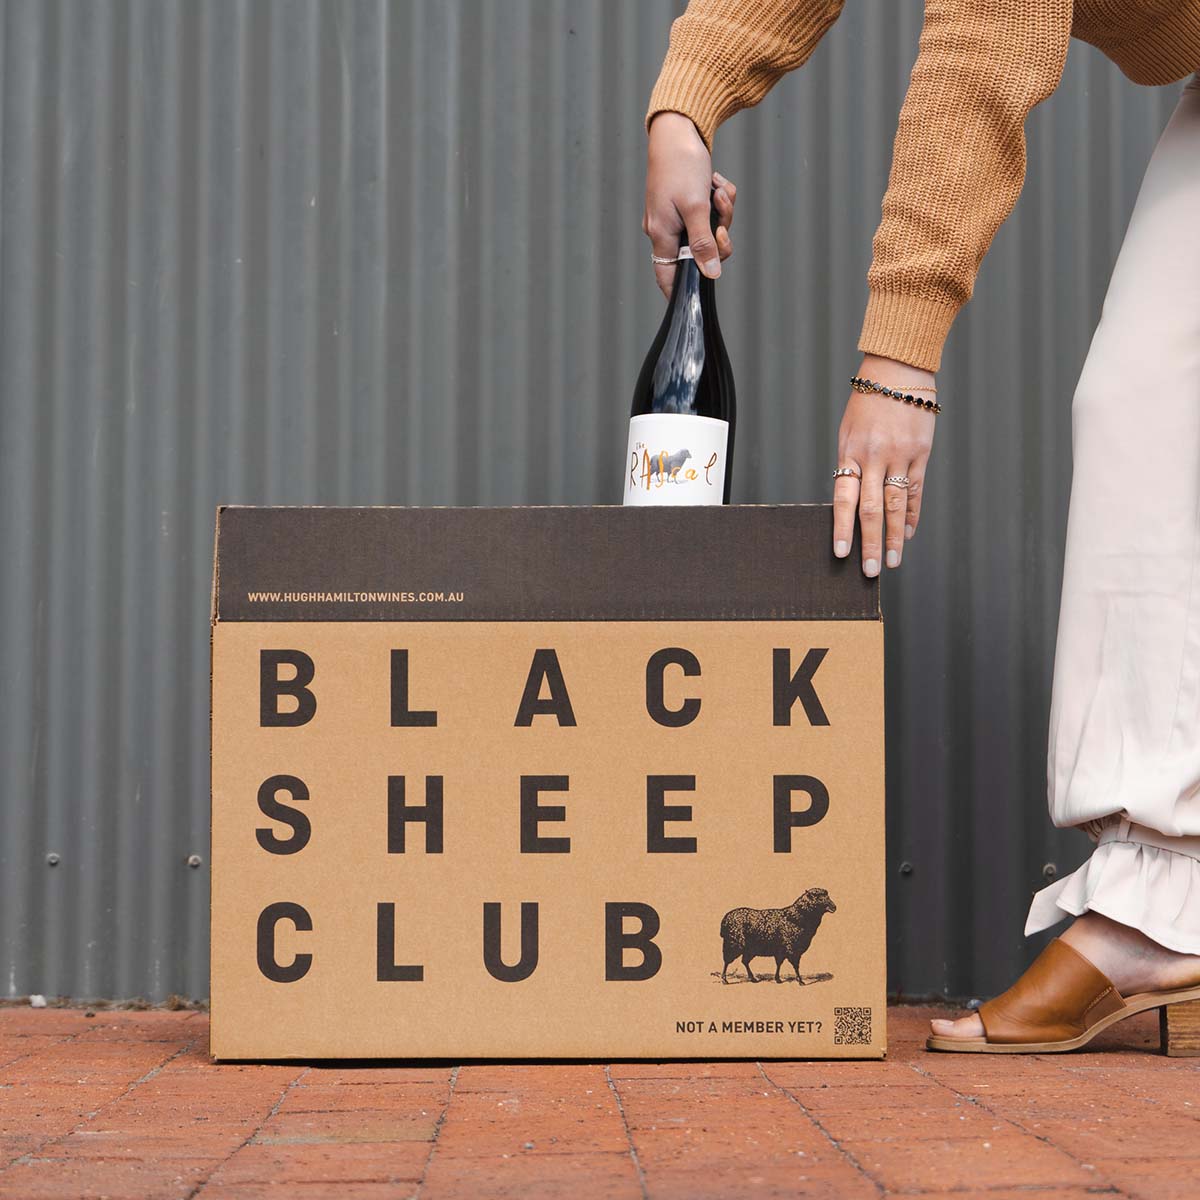 A Black Sheep Club box placed on brick flooring, a woman opening the box and pulling out a Hugh Hamilton Wines bottle, the label directed to the front. 